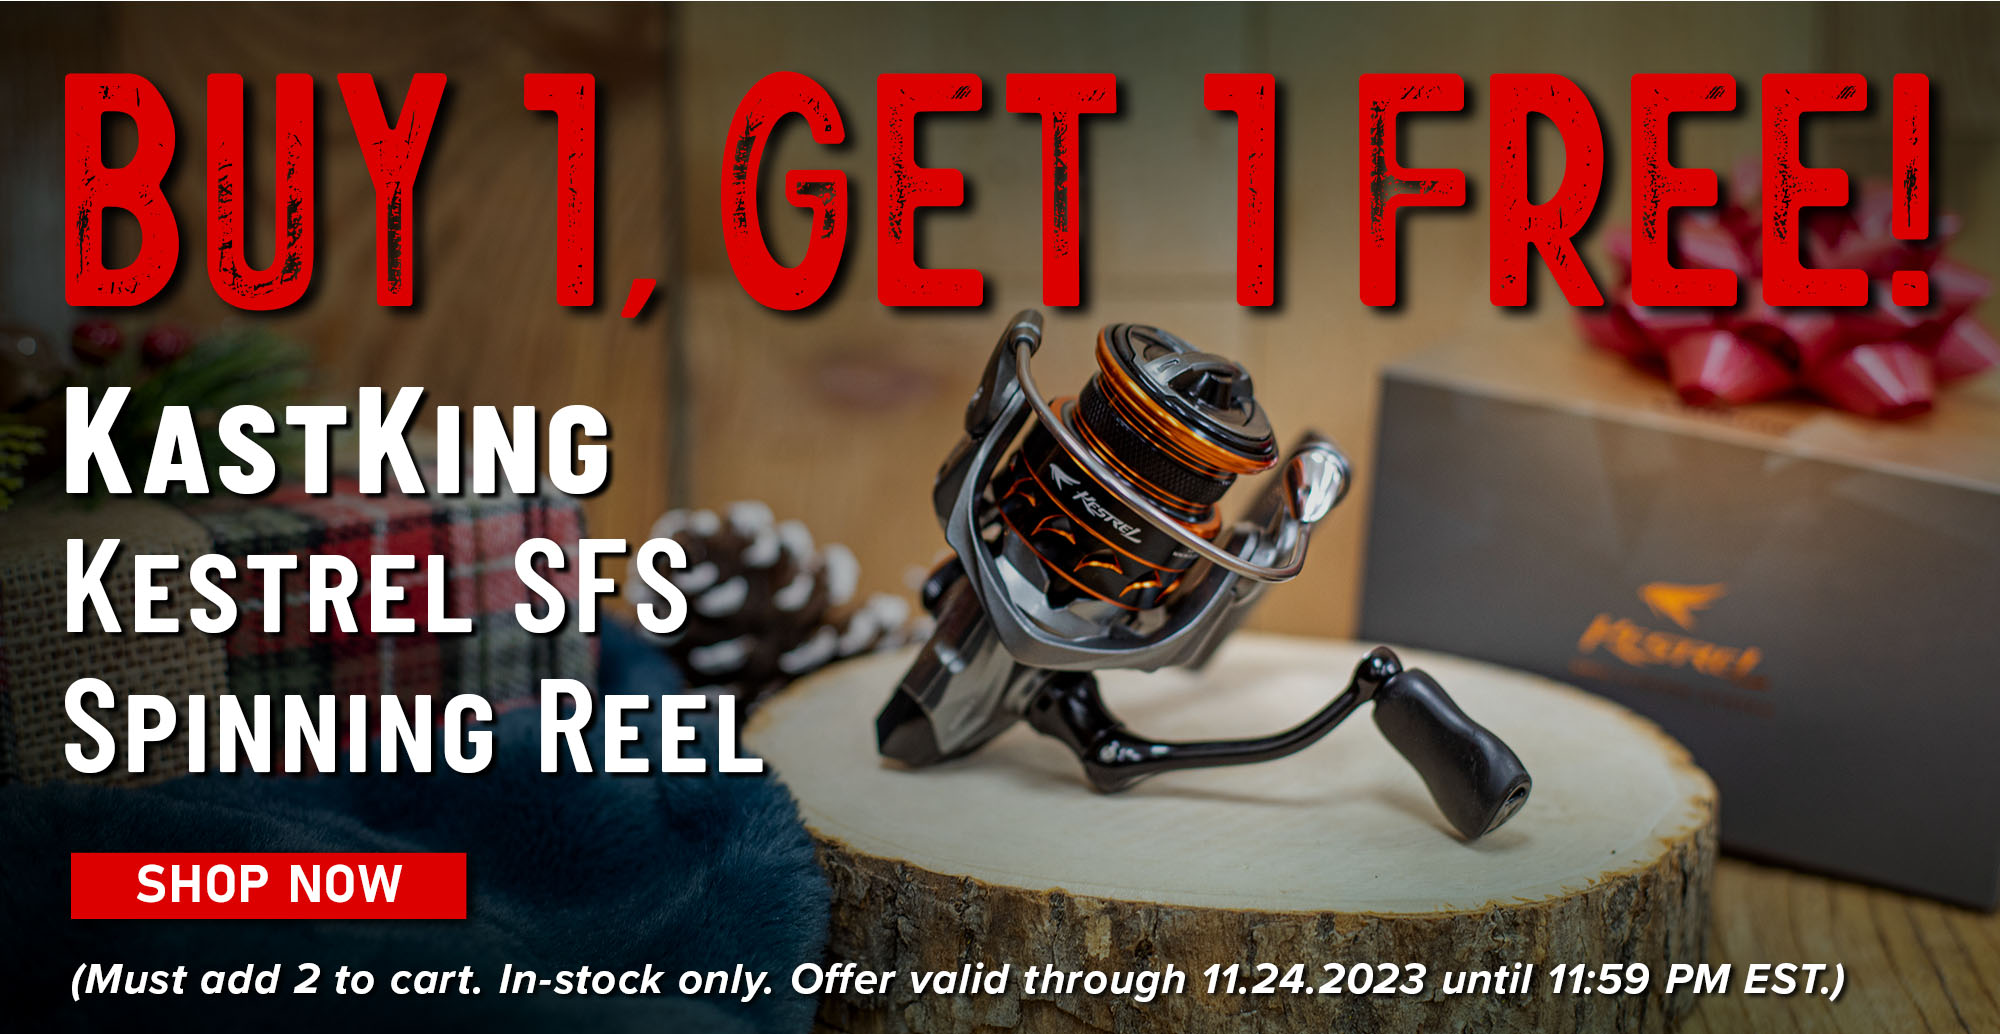 Buy 1, Get 1 Free! KastKing Kestrel SFS Spinning Reel Shop Now (Must add 2 to cart. In-stock only. Offer valid 11.23.2023 until 11:59 PM EST.)